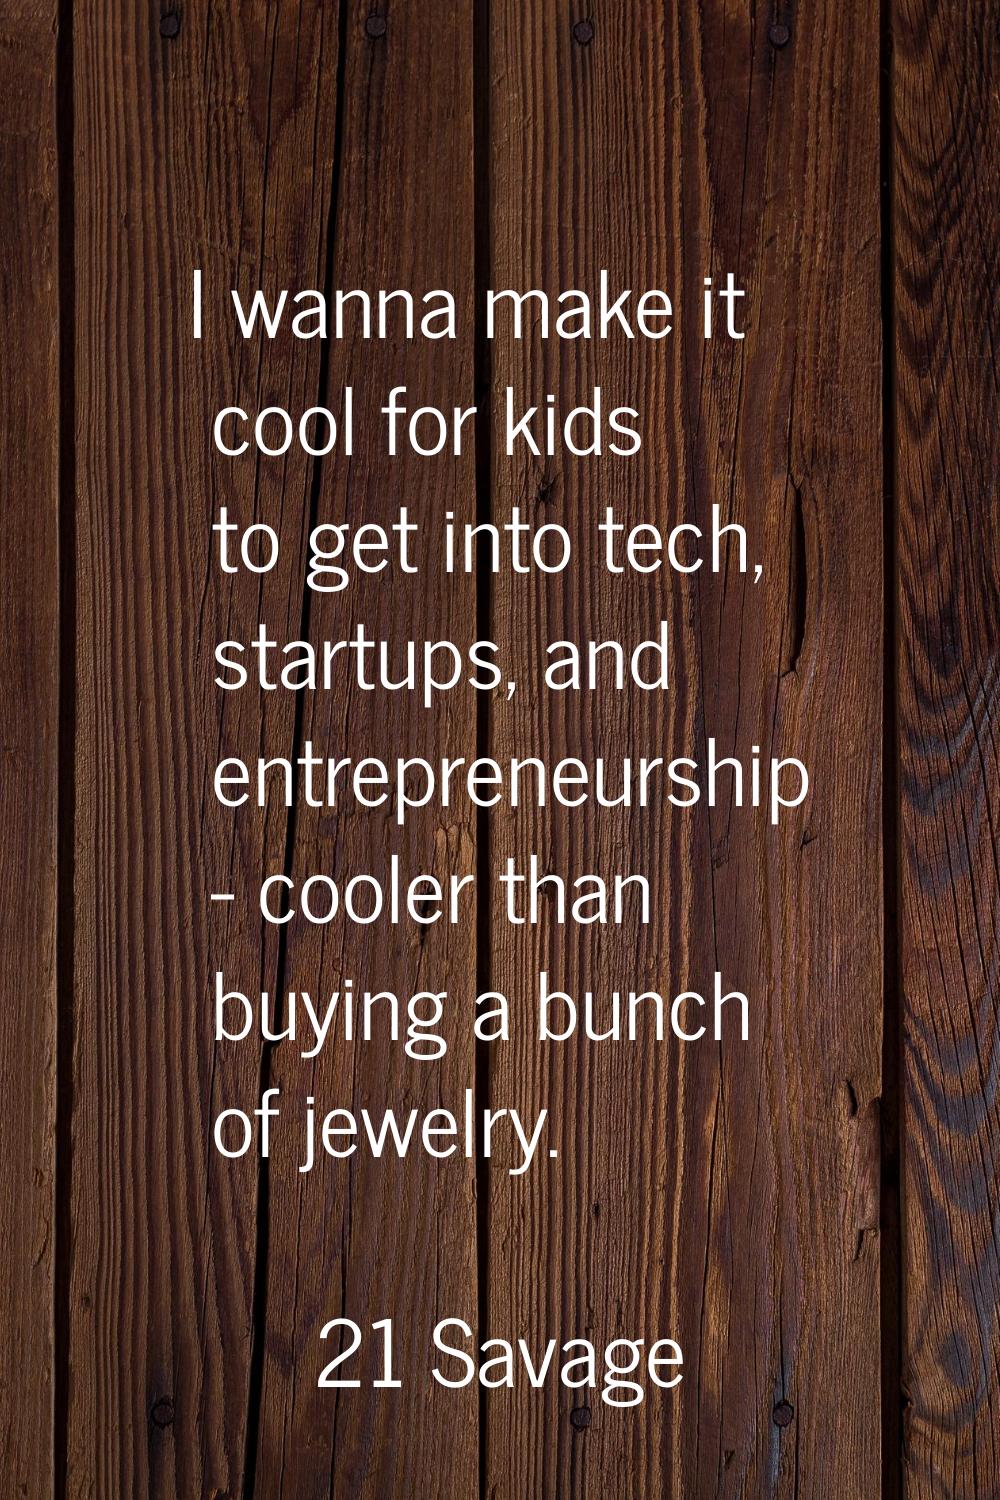 I wanna make it cool for kids to get into tech, startups, and entrepreneurship - cooler than buying